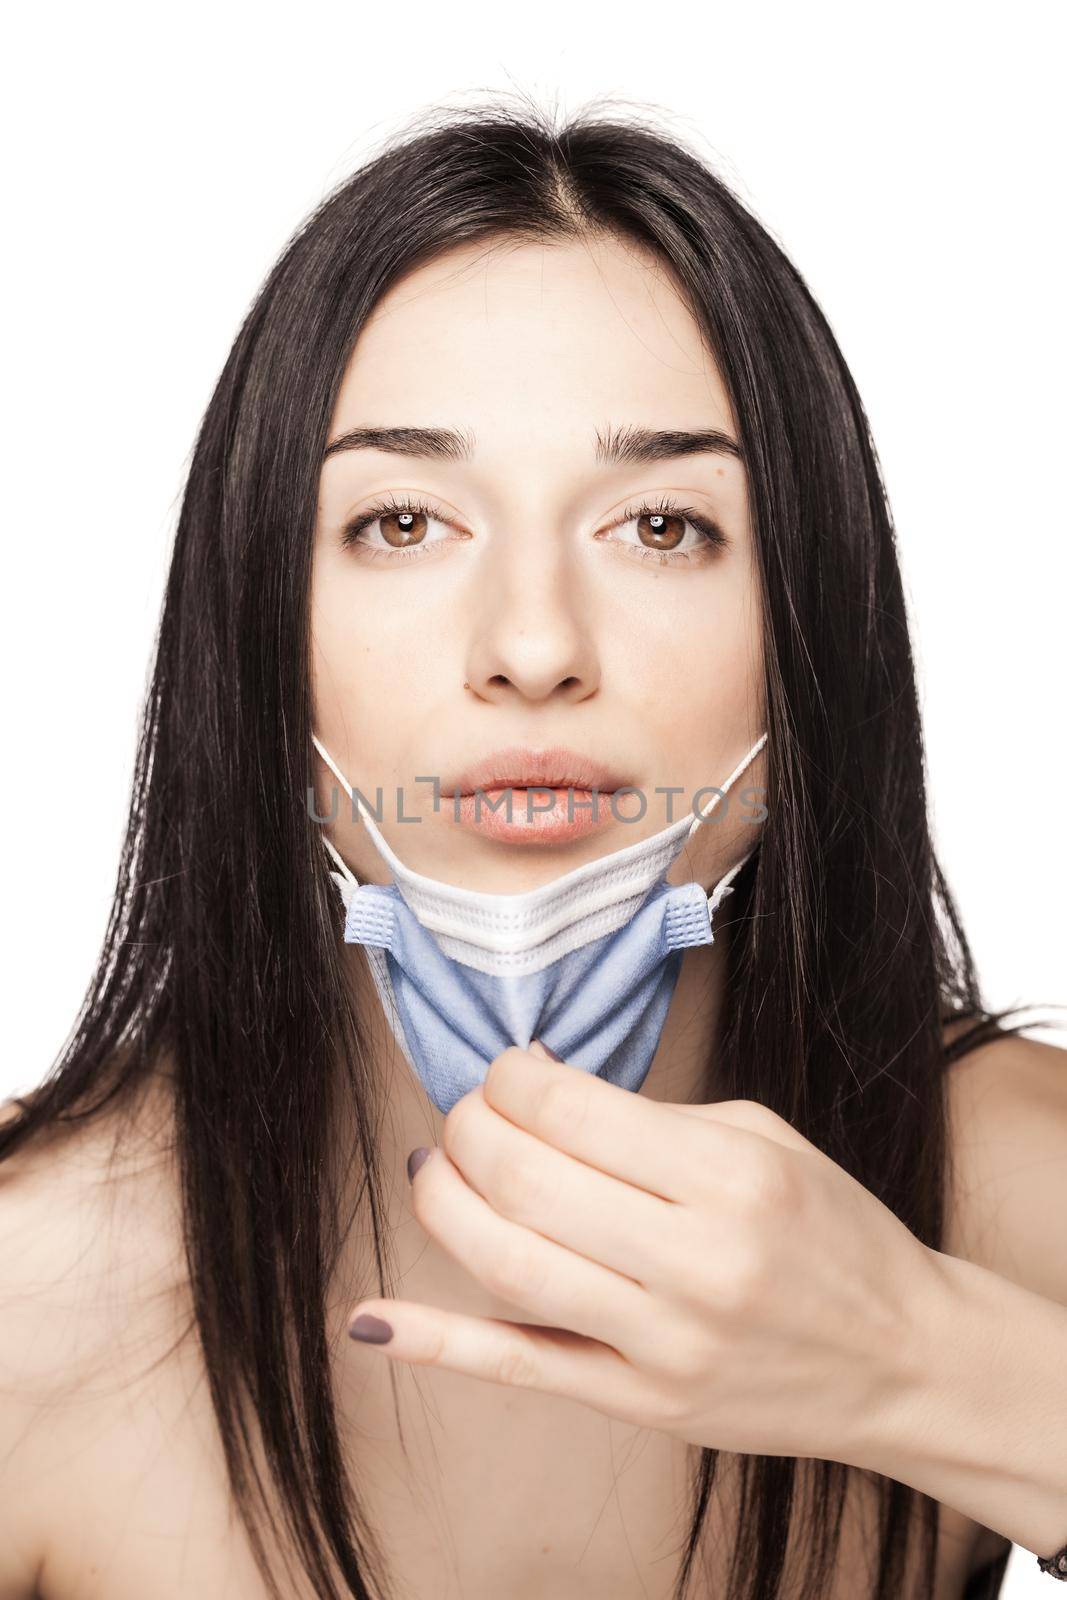 Serious looking girl pulling away medical face mask. Portrait against white background. by kokimk